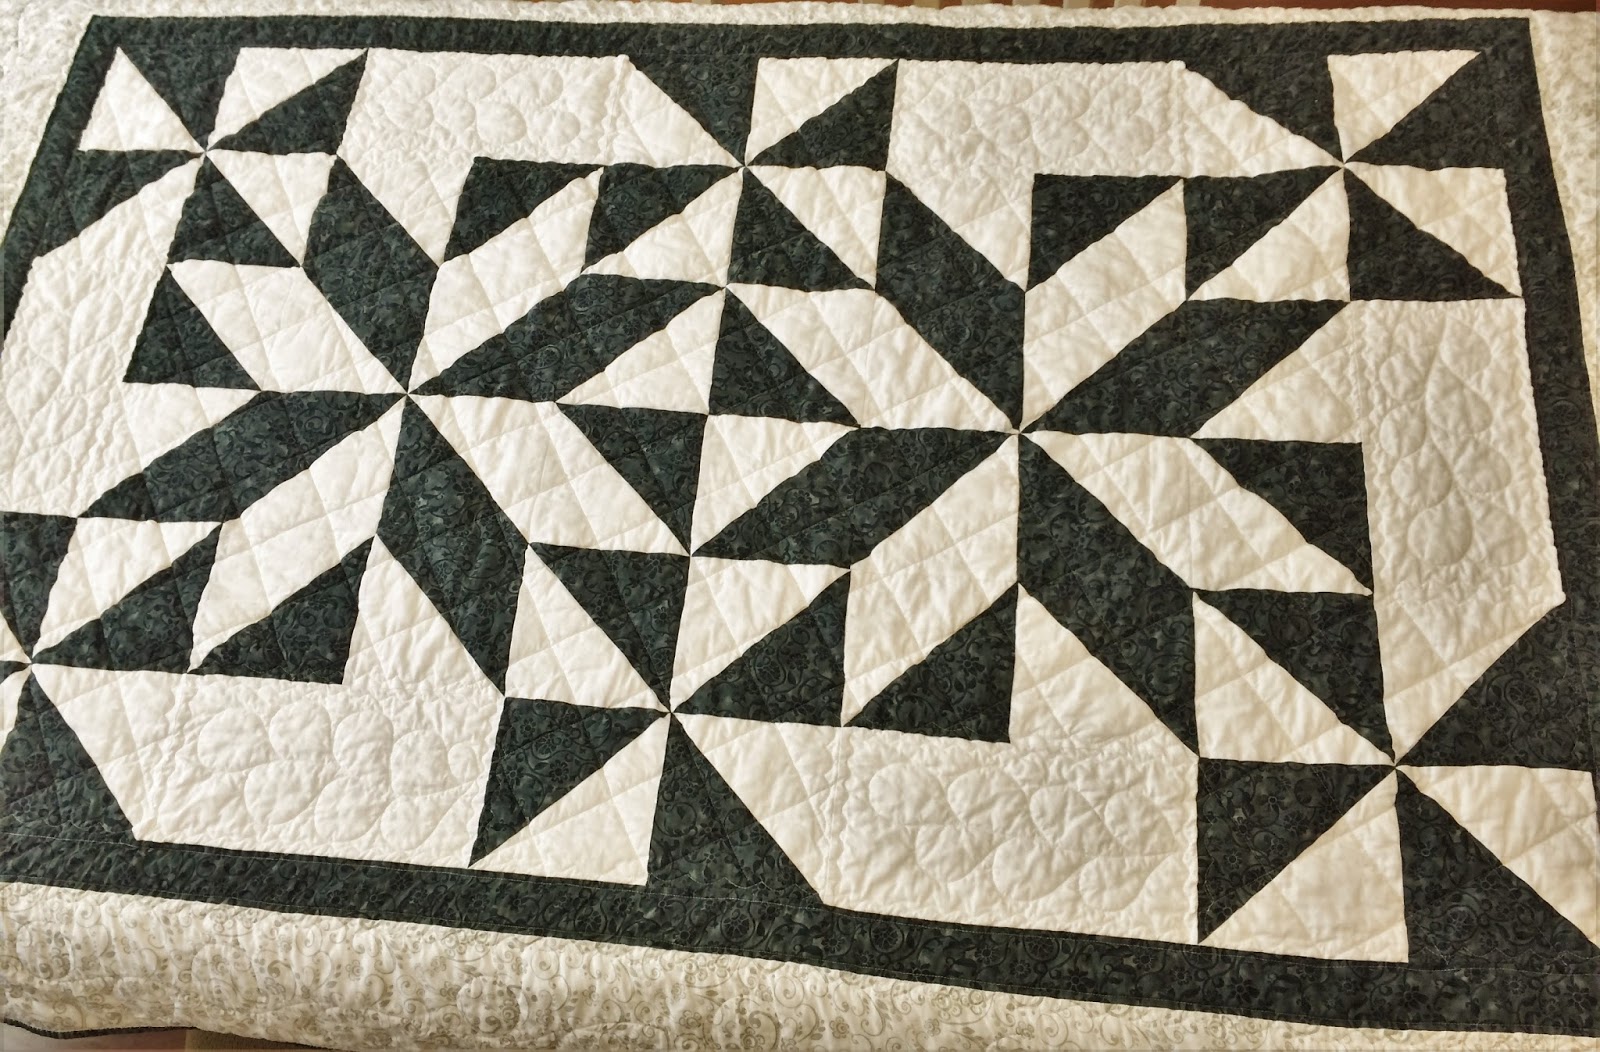 large star quilt pattern